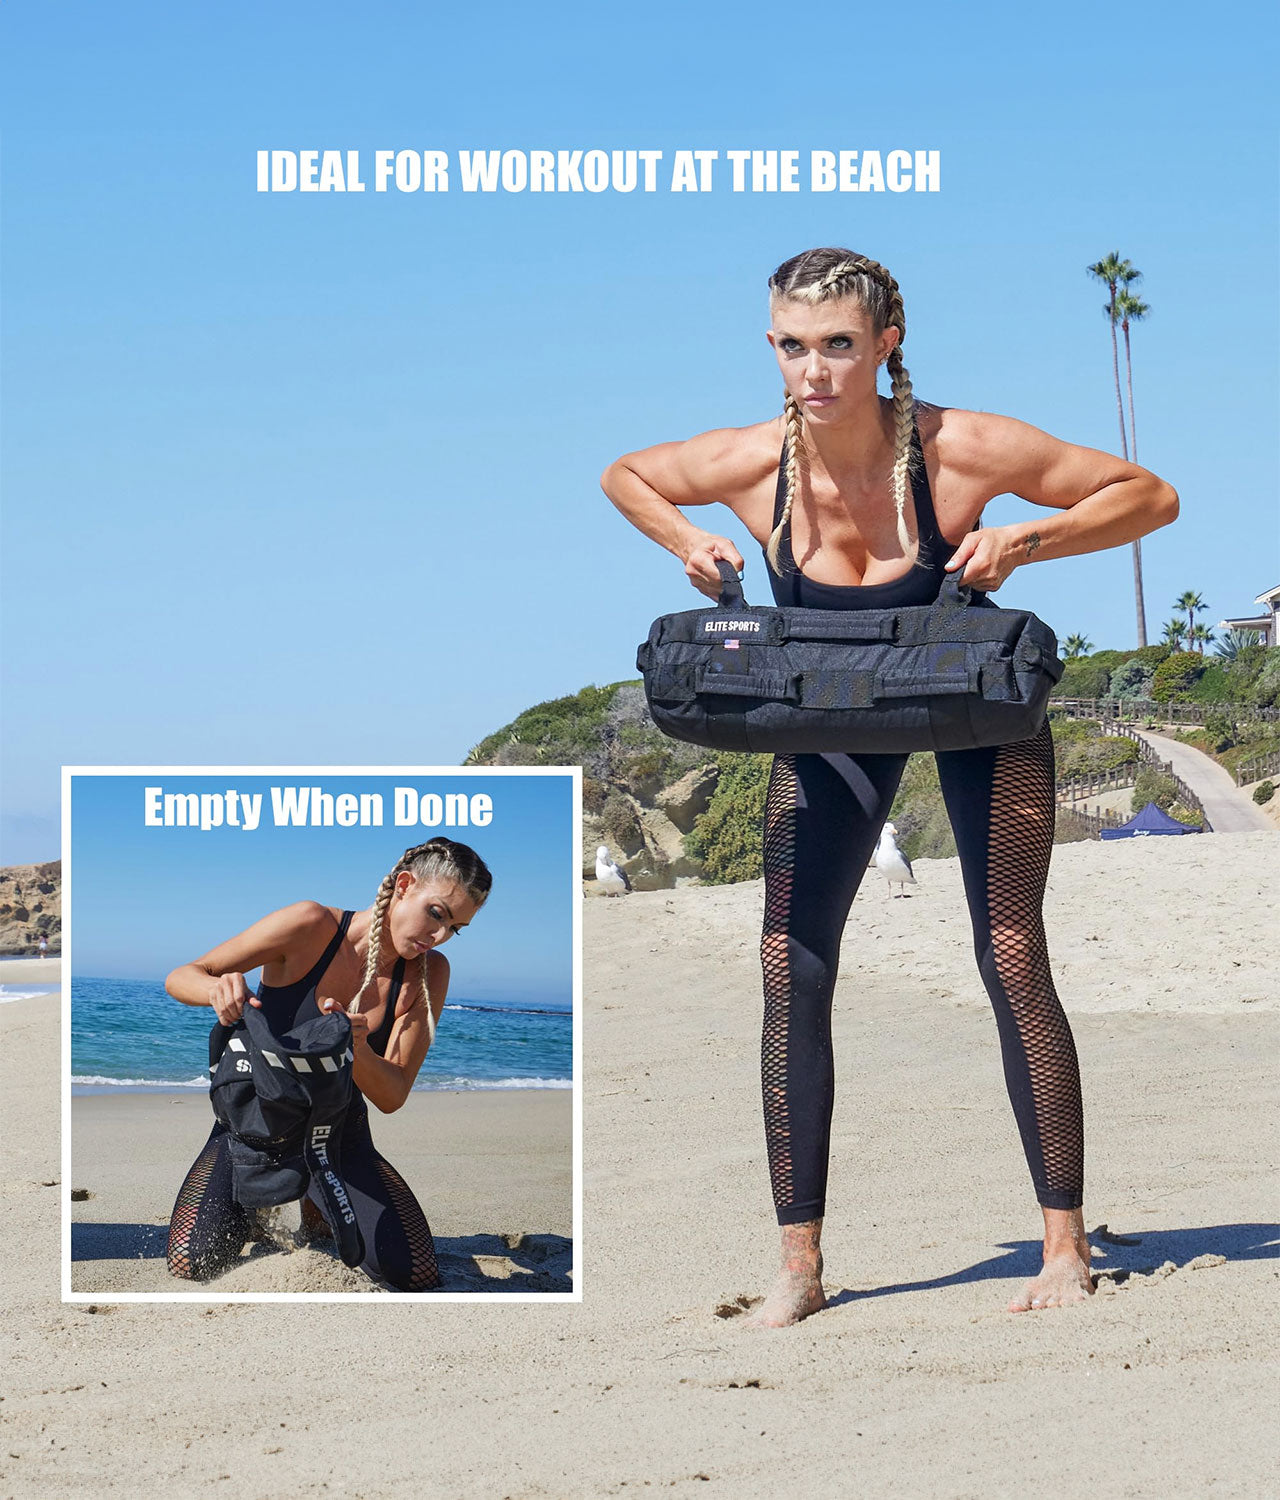 Elite Sports Set of 3 - Core Duffel Workout Sandbags  Ideal For Workout At the Beach